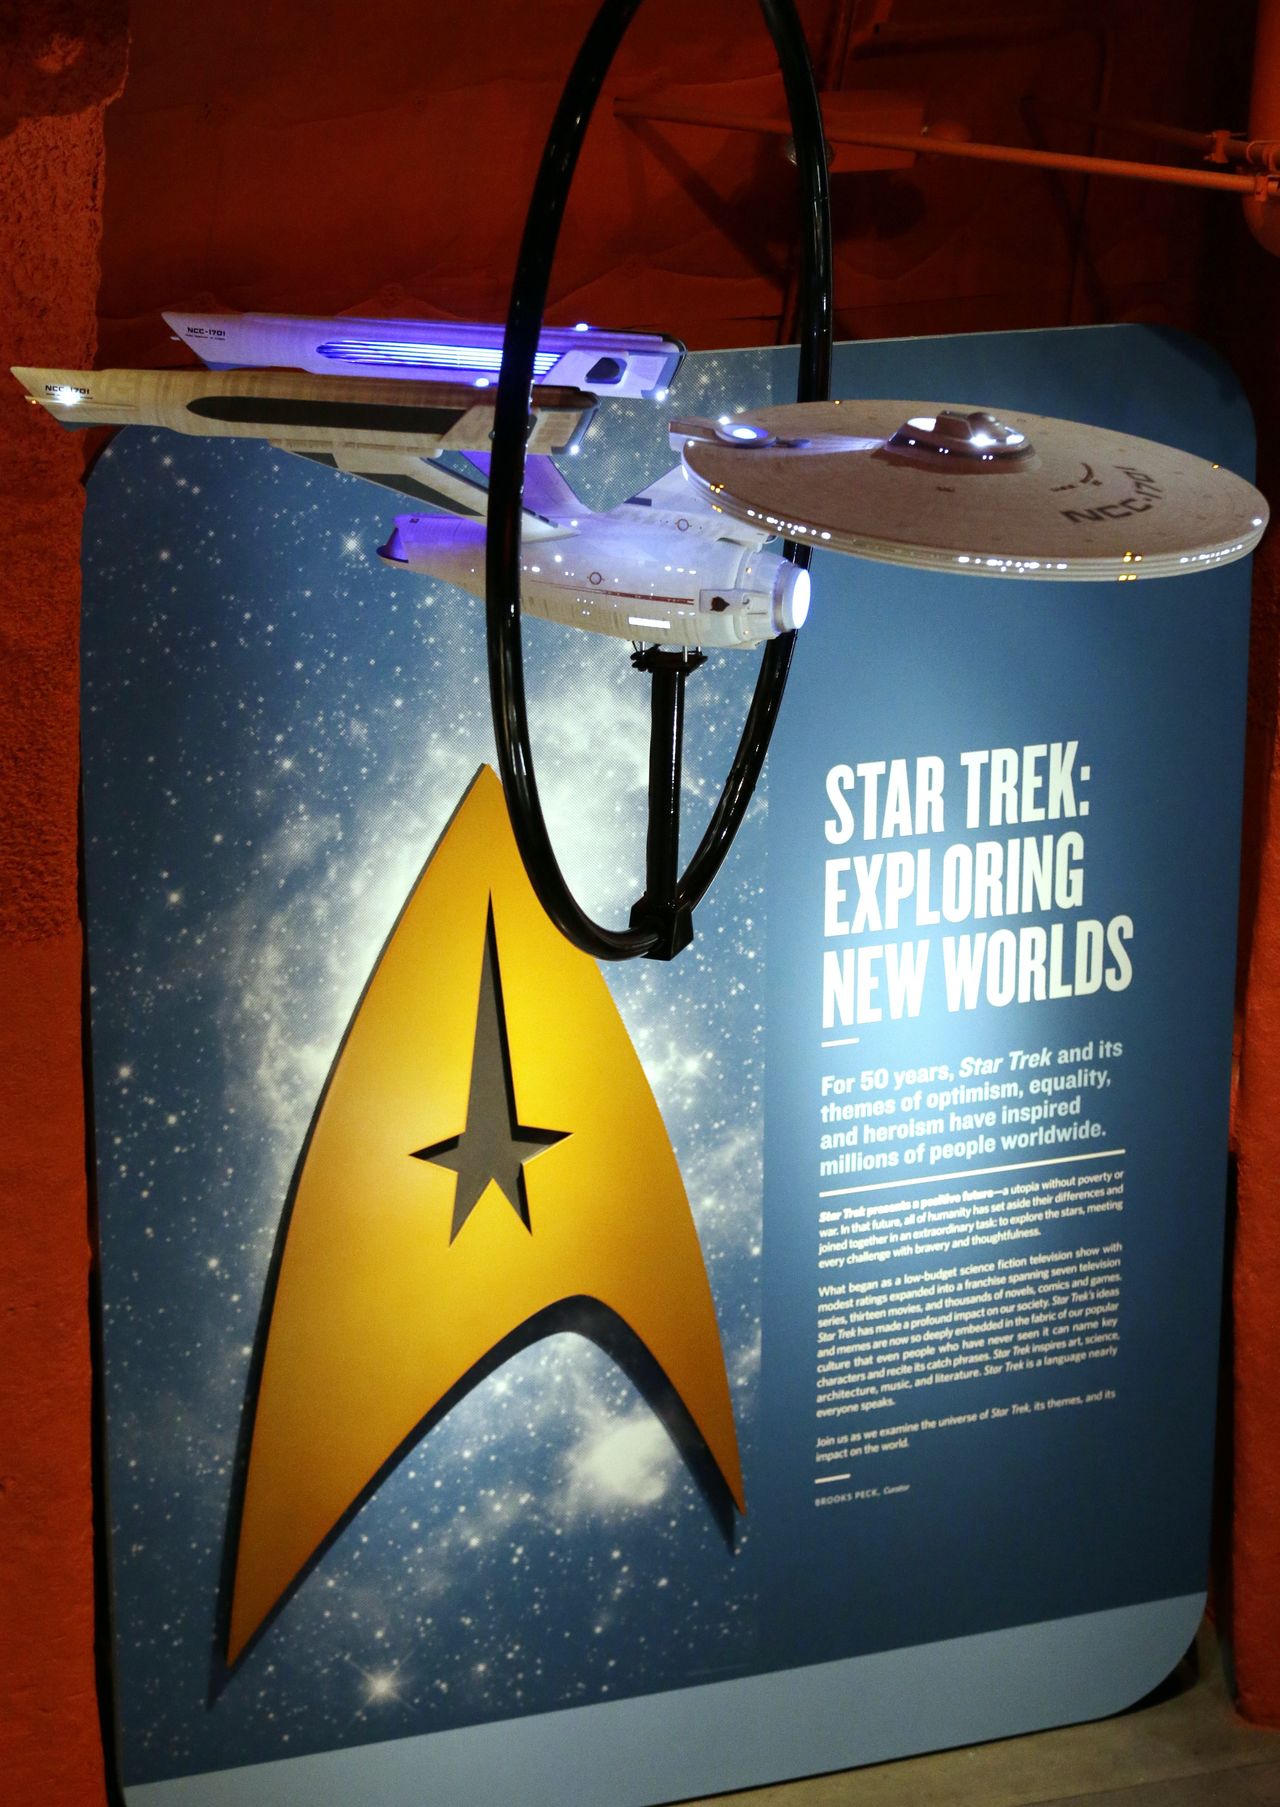 A model of the USS Enterprise, NCC-1701, hangs above information about the exhibit.
